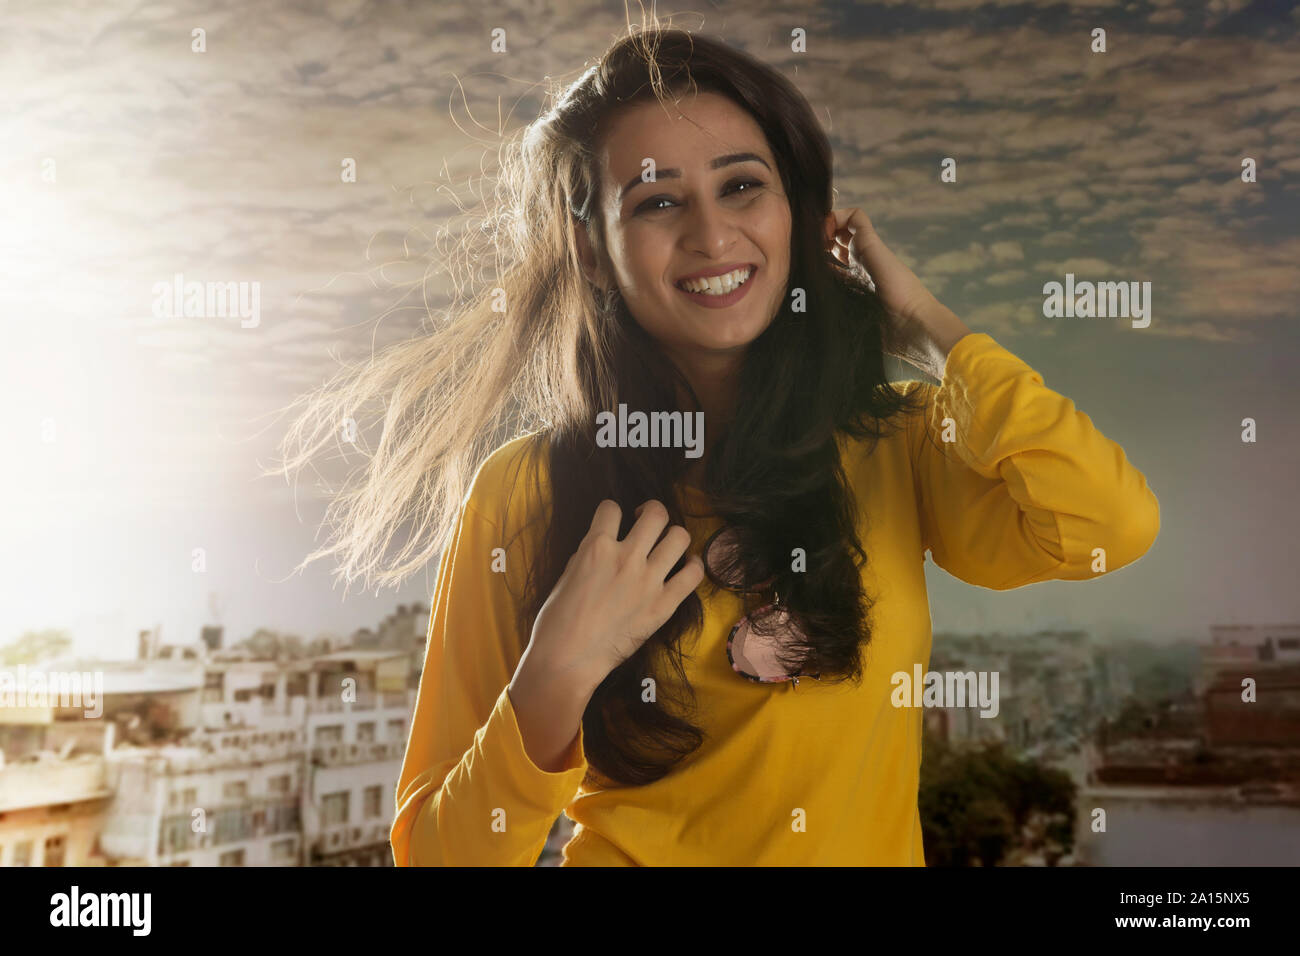 Portrait of smiling woman on urban rooftop at sunset Stock Photo